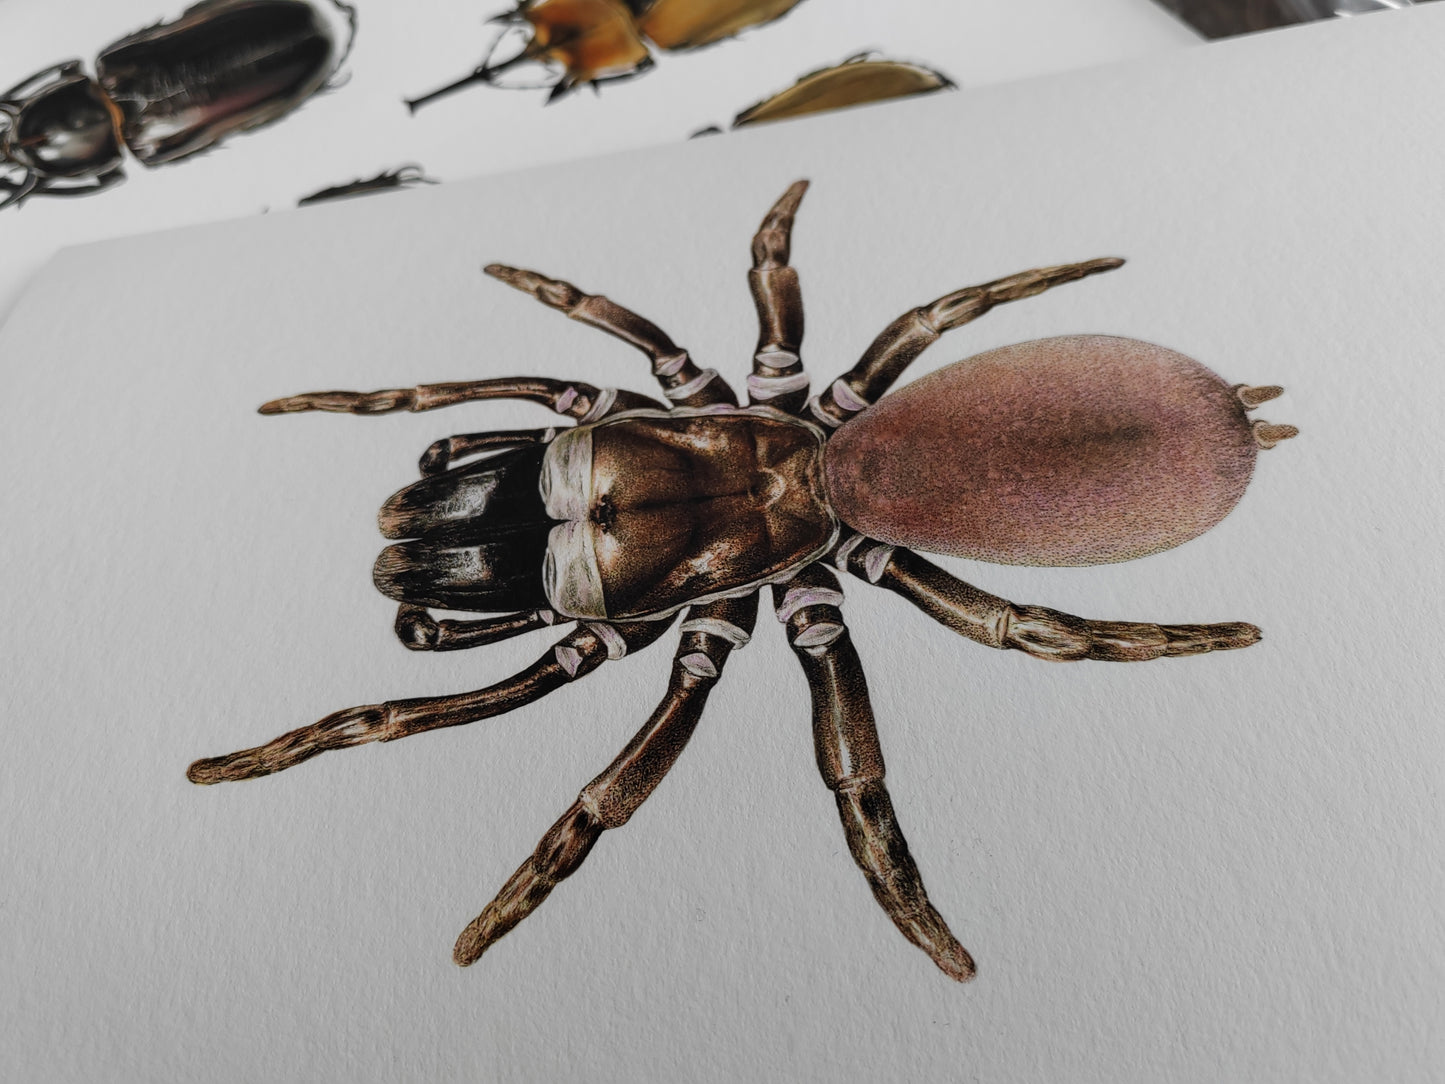 Atypus affinis, Purse Web Spider limited edition art print A4 size